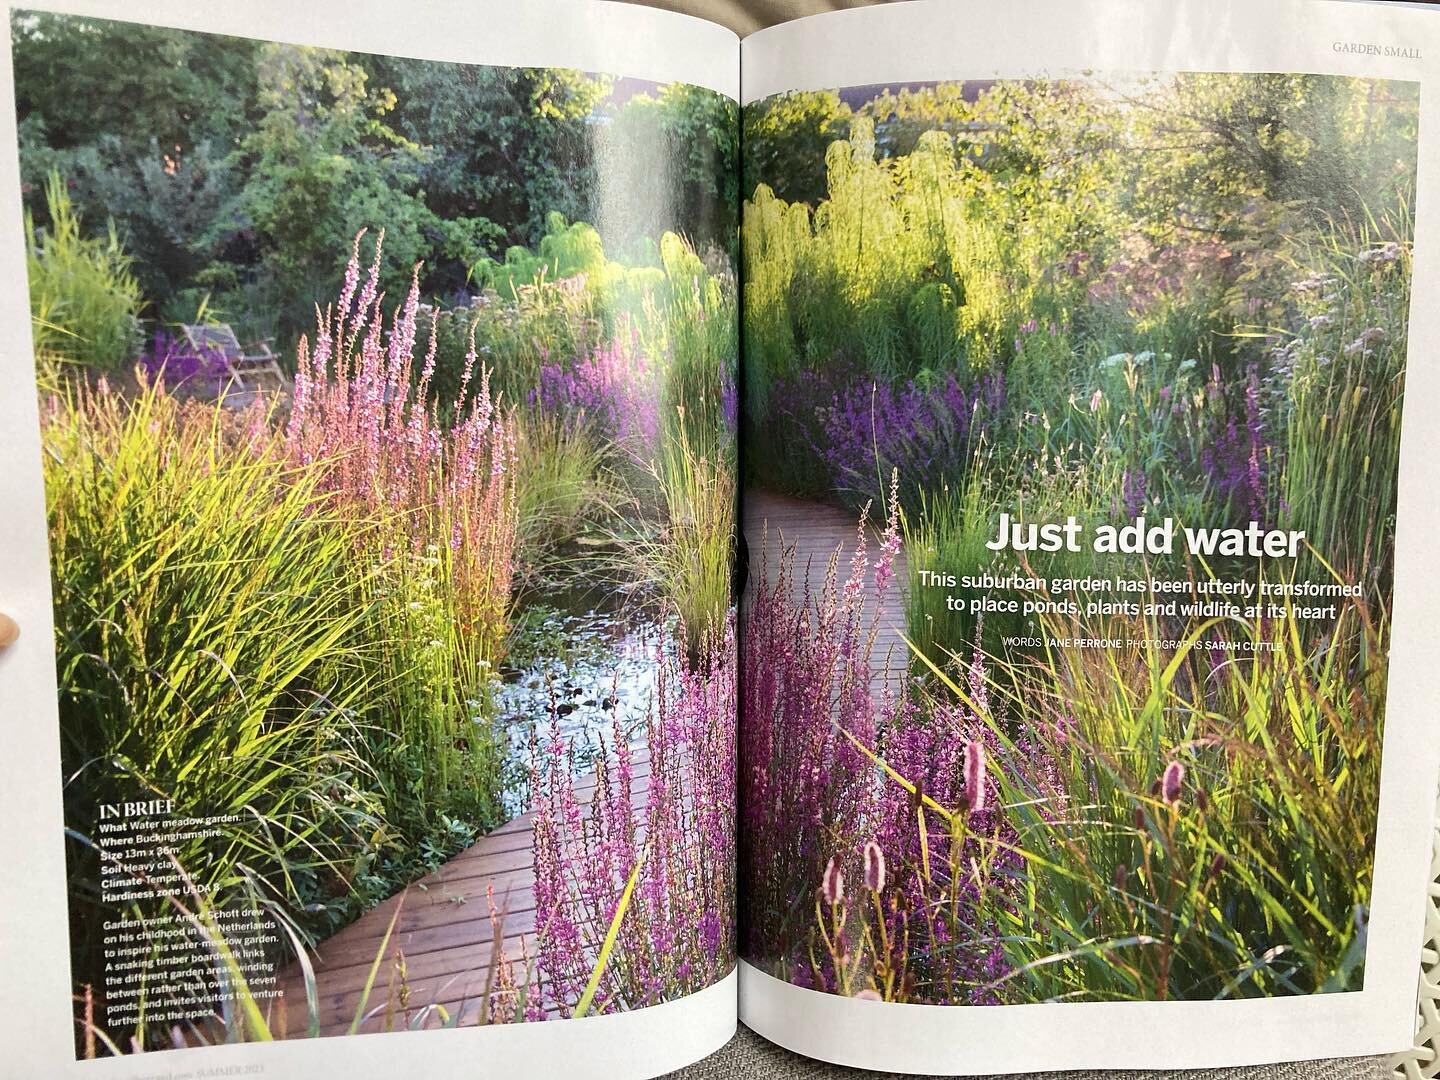 Big moment for us! Our first garden featured in print and it&rsquo;s Gardens Illustrated. A dream come true!

And to be in the Wild edition alongside such talented designers and ground breaking work such as @kneppwilding is a real privilege.

Thank y